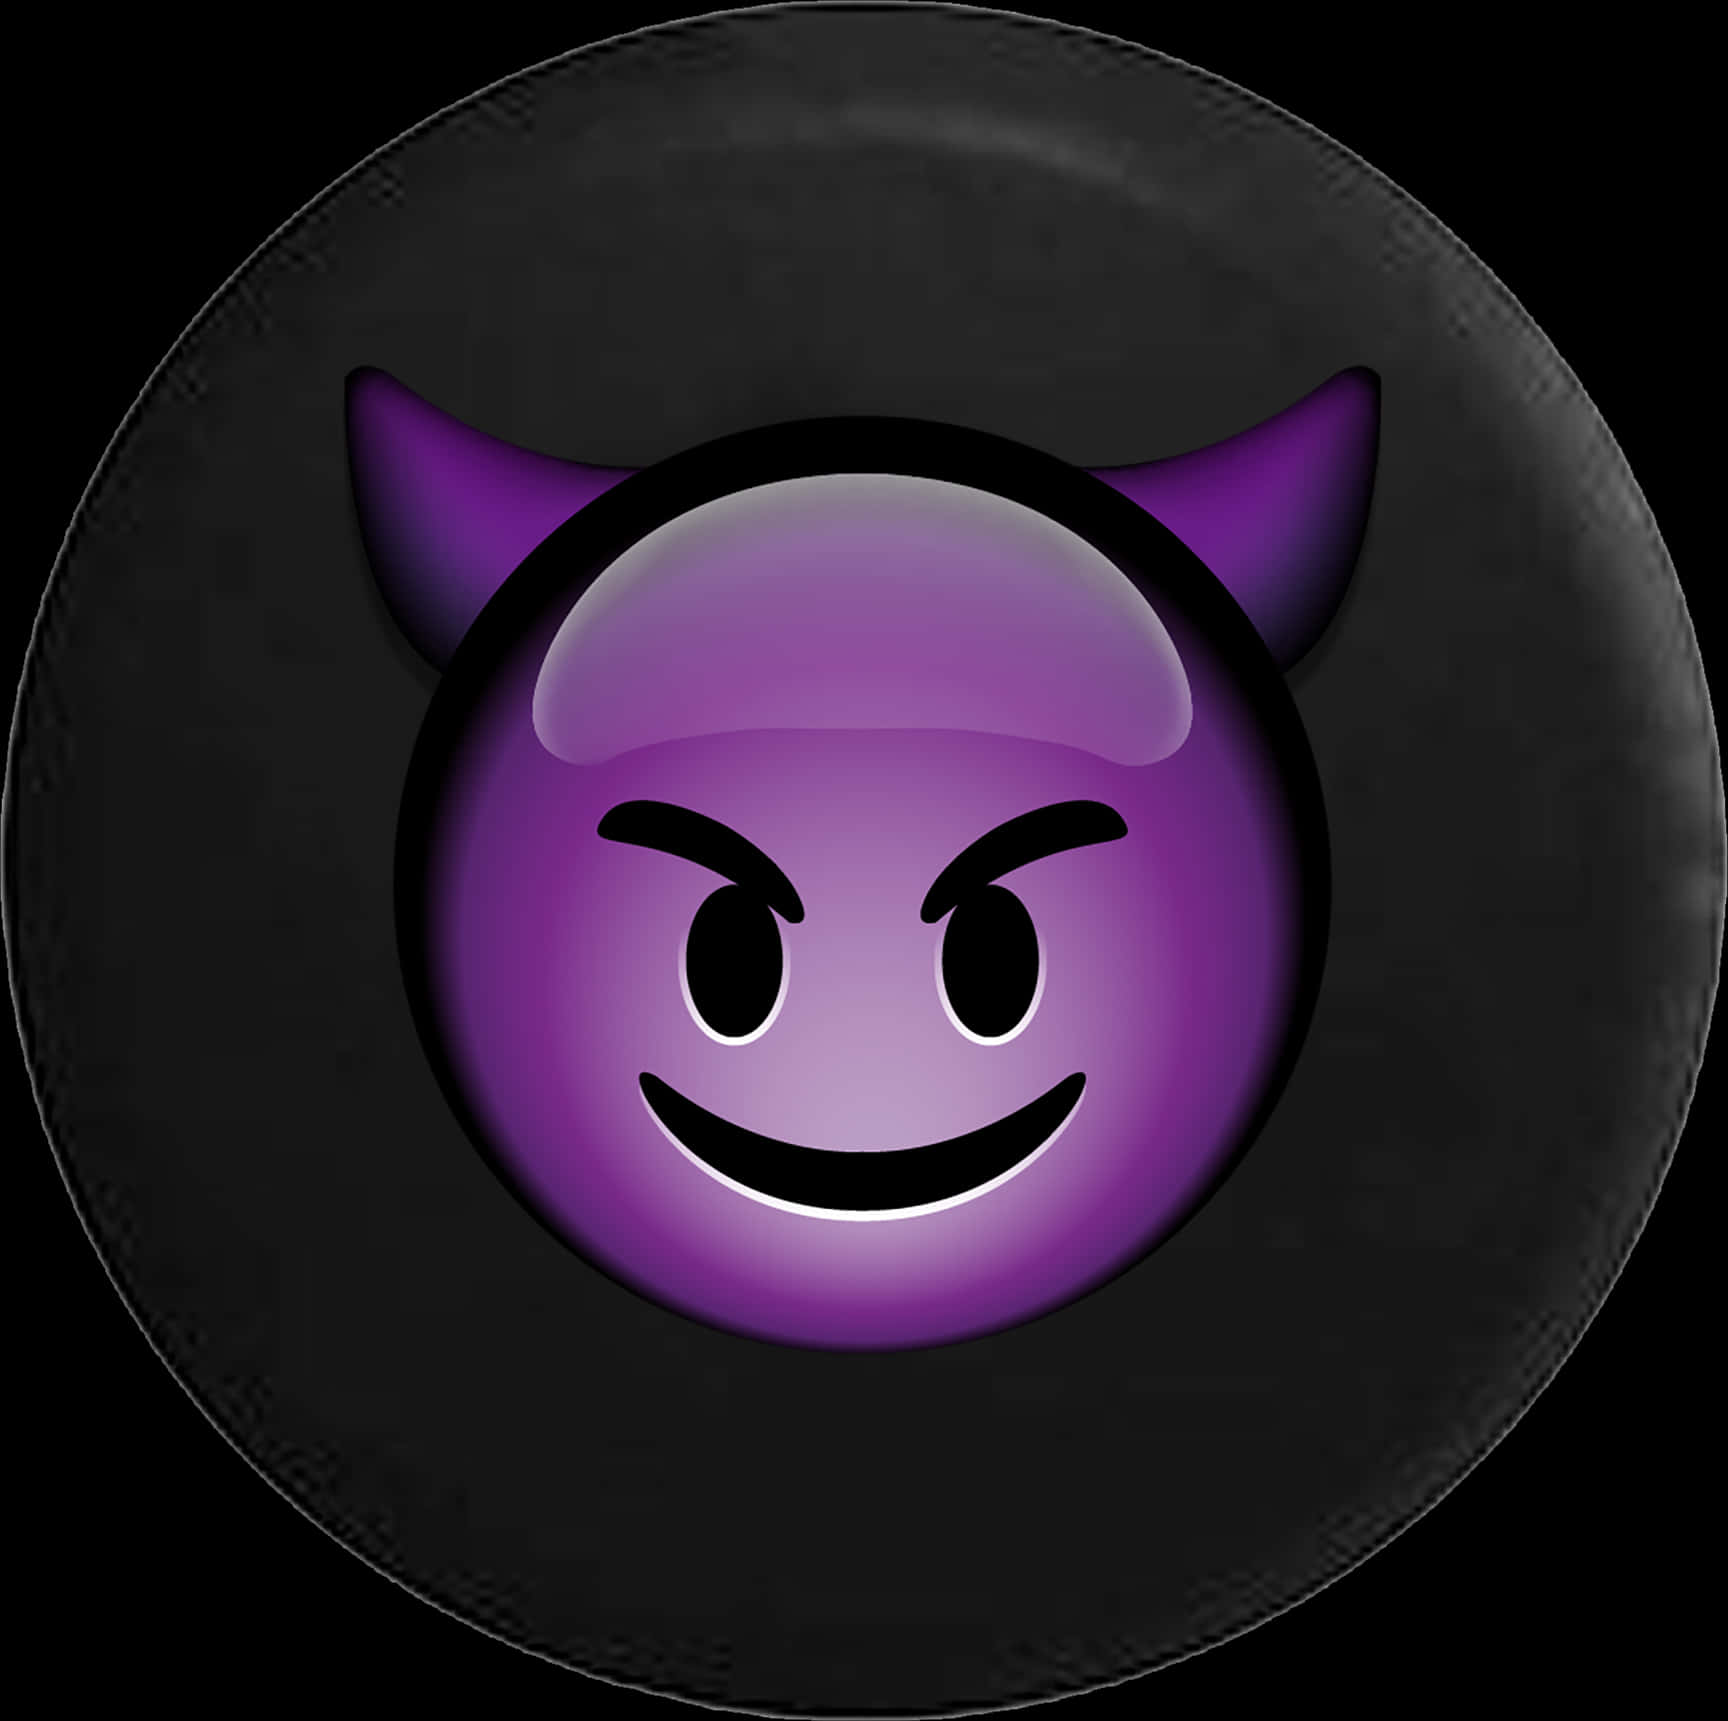 A Purple Smiley Face With Horns On A Black Tire Cover